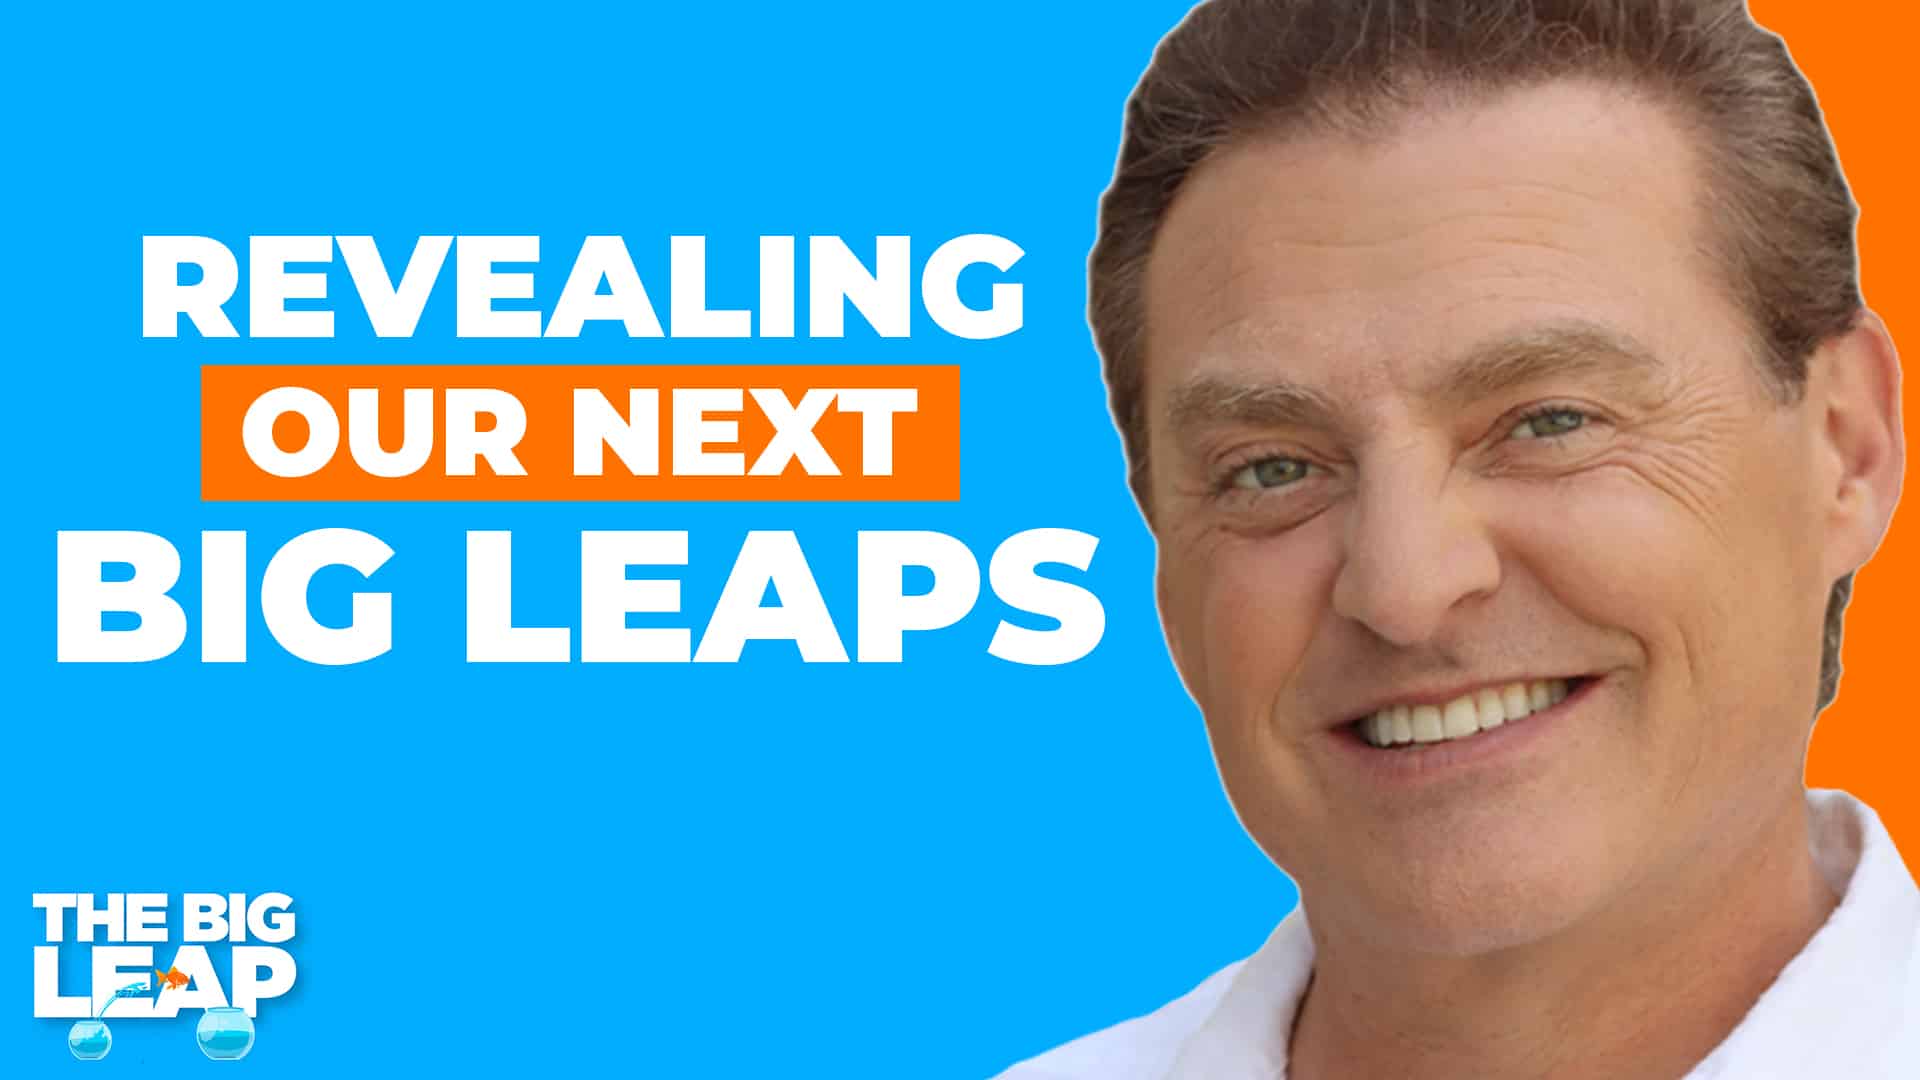 The Big Leap Episode 73 Cover Photo showing a photo of Mike Koenigs and the words "Revealing Out Next Big Leaps."